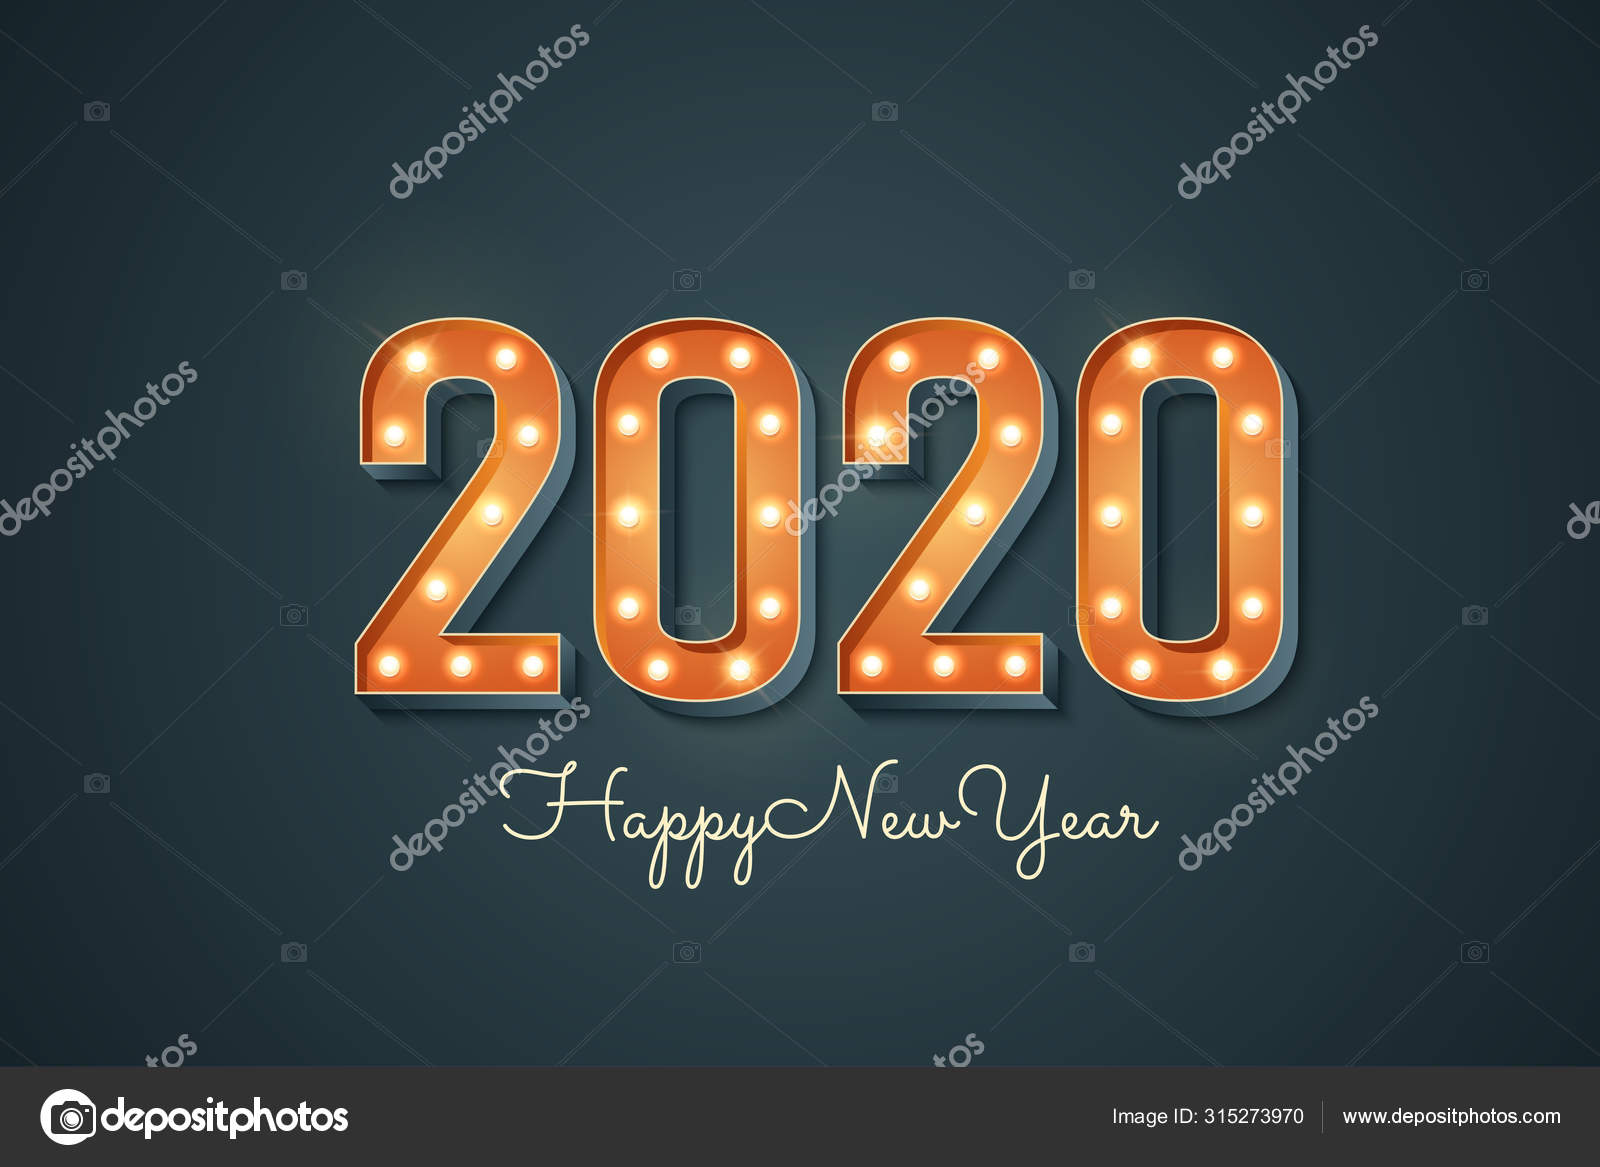 2020 sign with light bulb. Happy new year greeting card with 3d ...